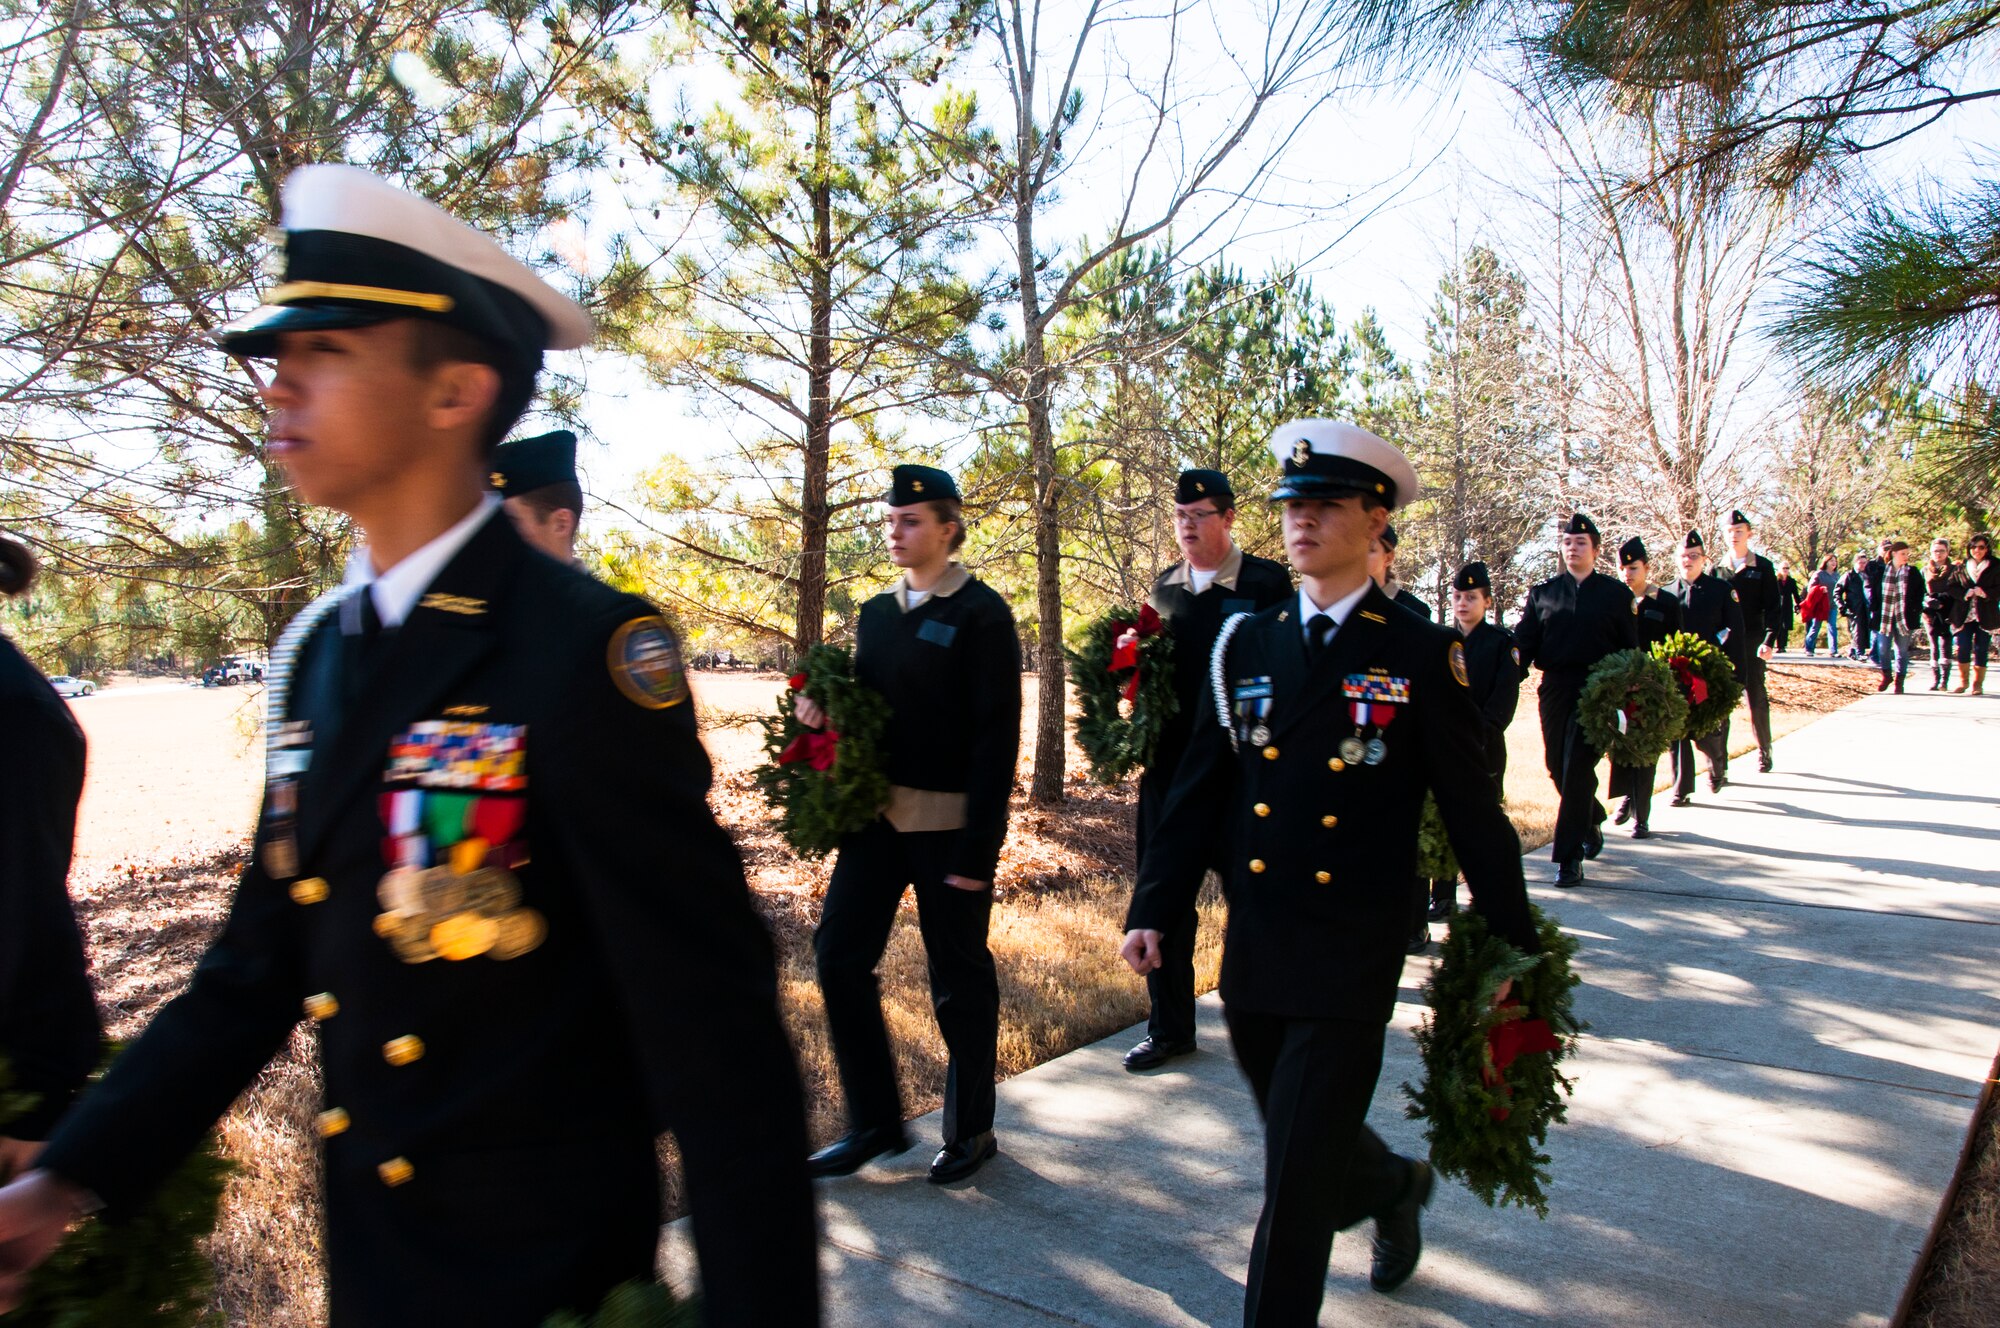 Junior Reserve Officer Training Corps members march in formation for the Wreaths Across America ceremony at Georgia National Cemetery in Canton, Ga. Dec. 13, 2014. Wreaths Across America occurs the second Saturday of December every year. (U.S. Air Force photo/Senior Airman Daniel Phelps)